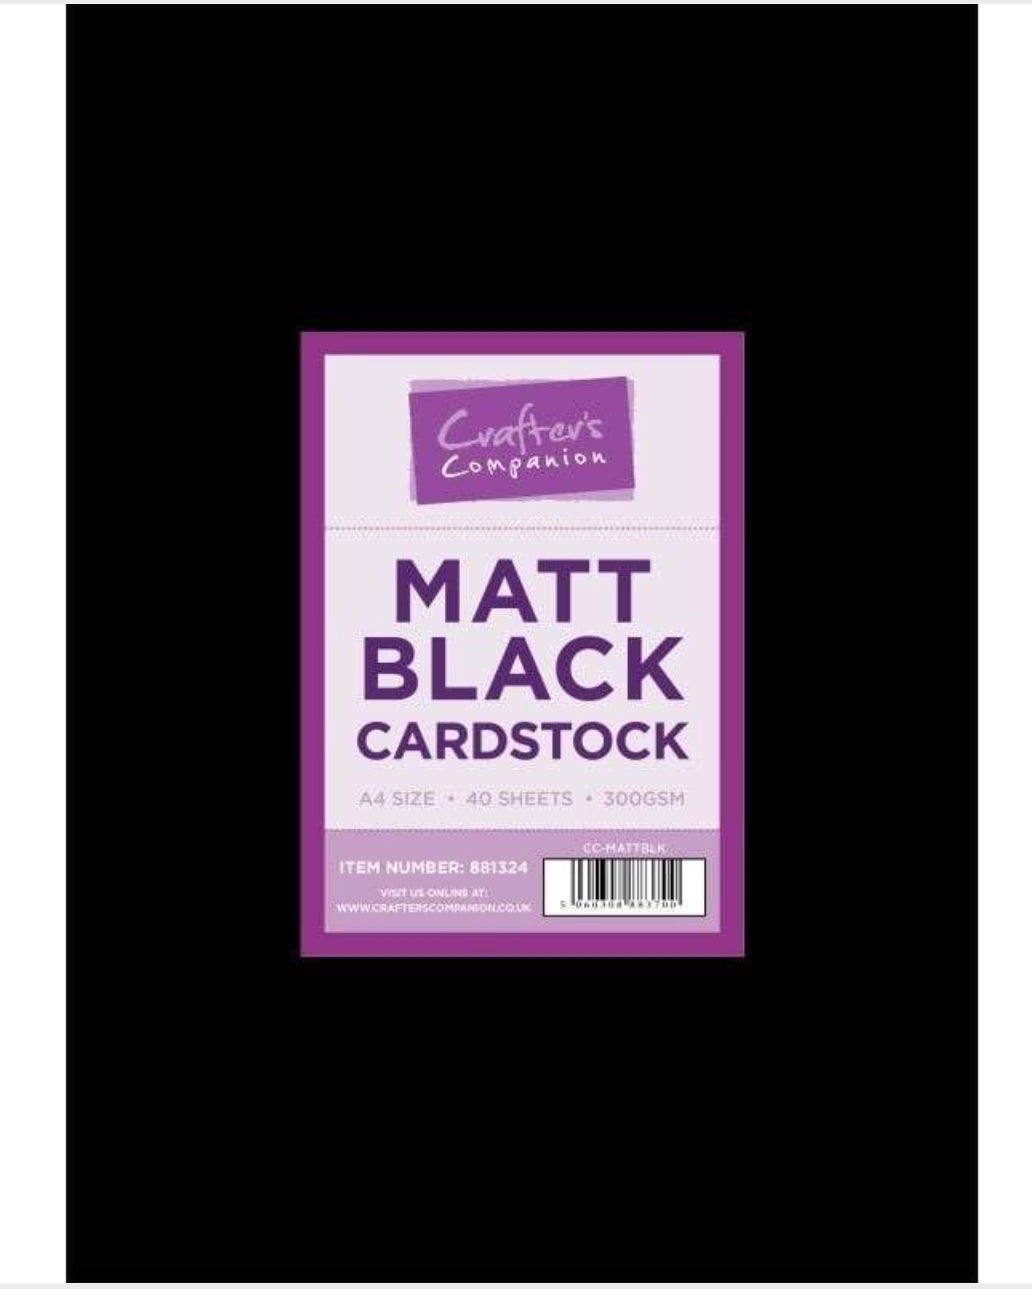 Crafters Companion Matt Black 300 gsm Cardstock A4 Pack of 40 sheets